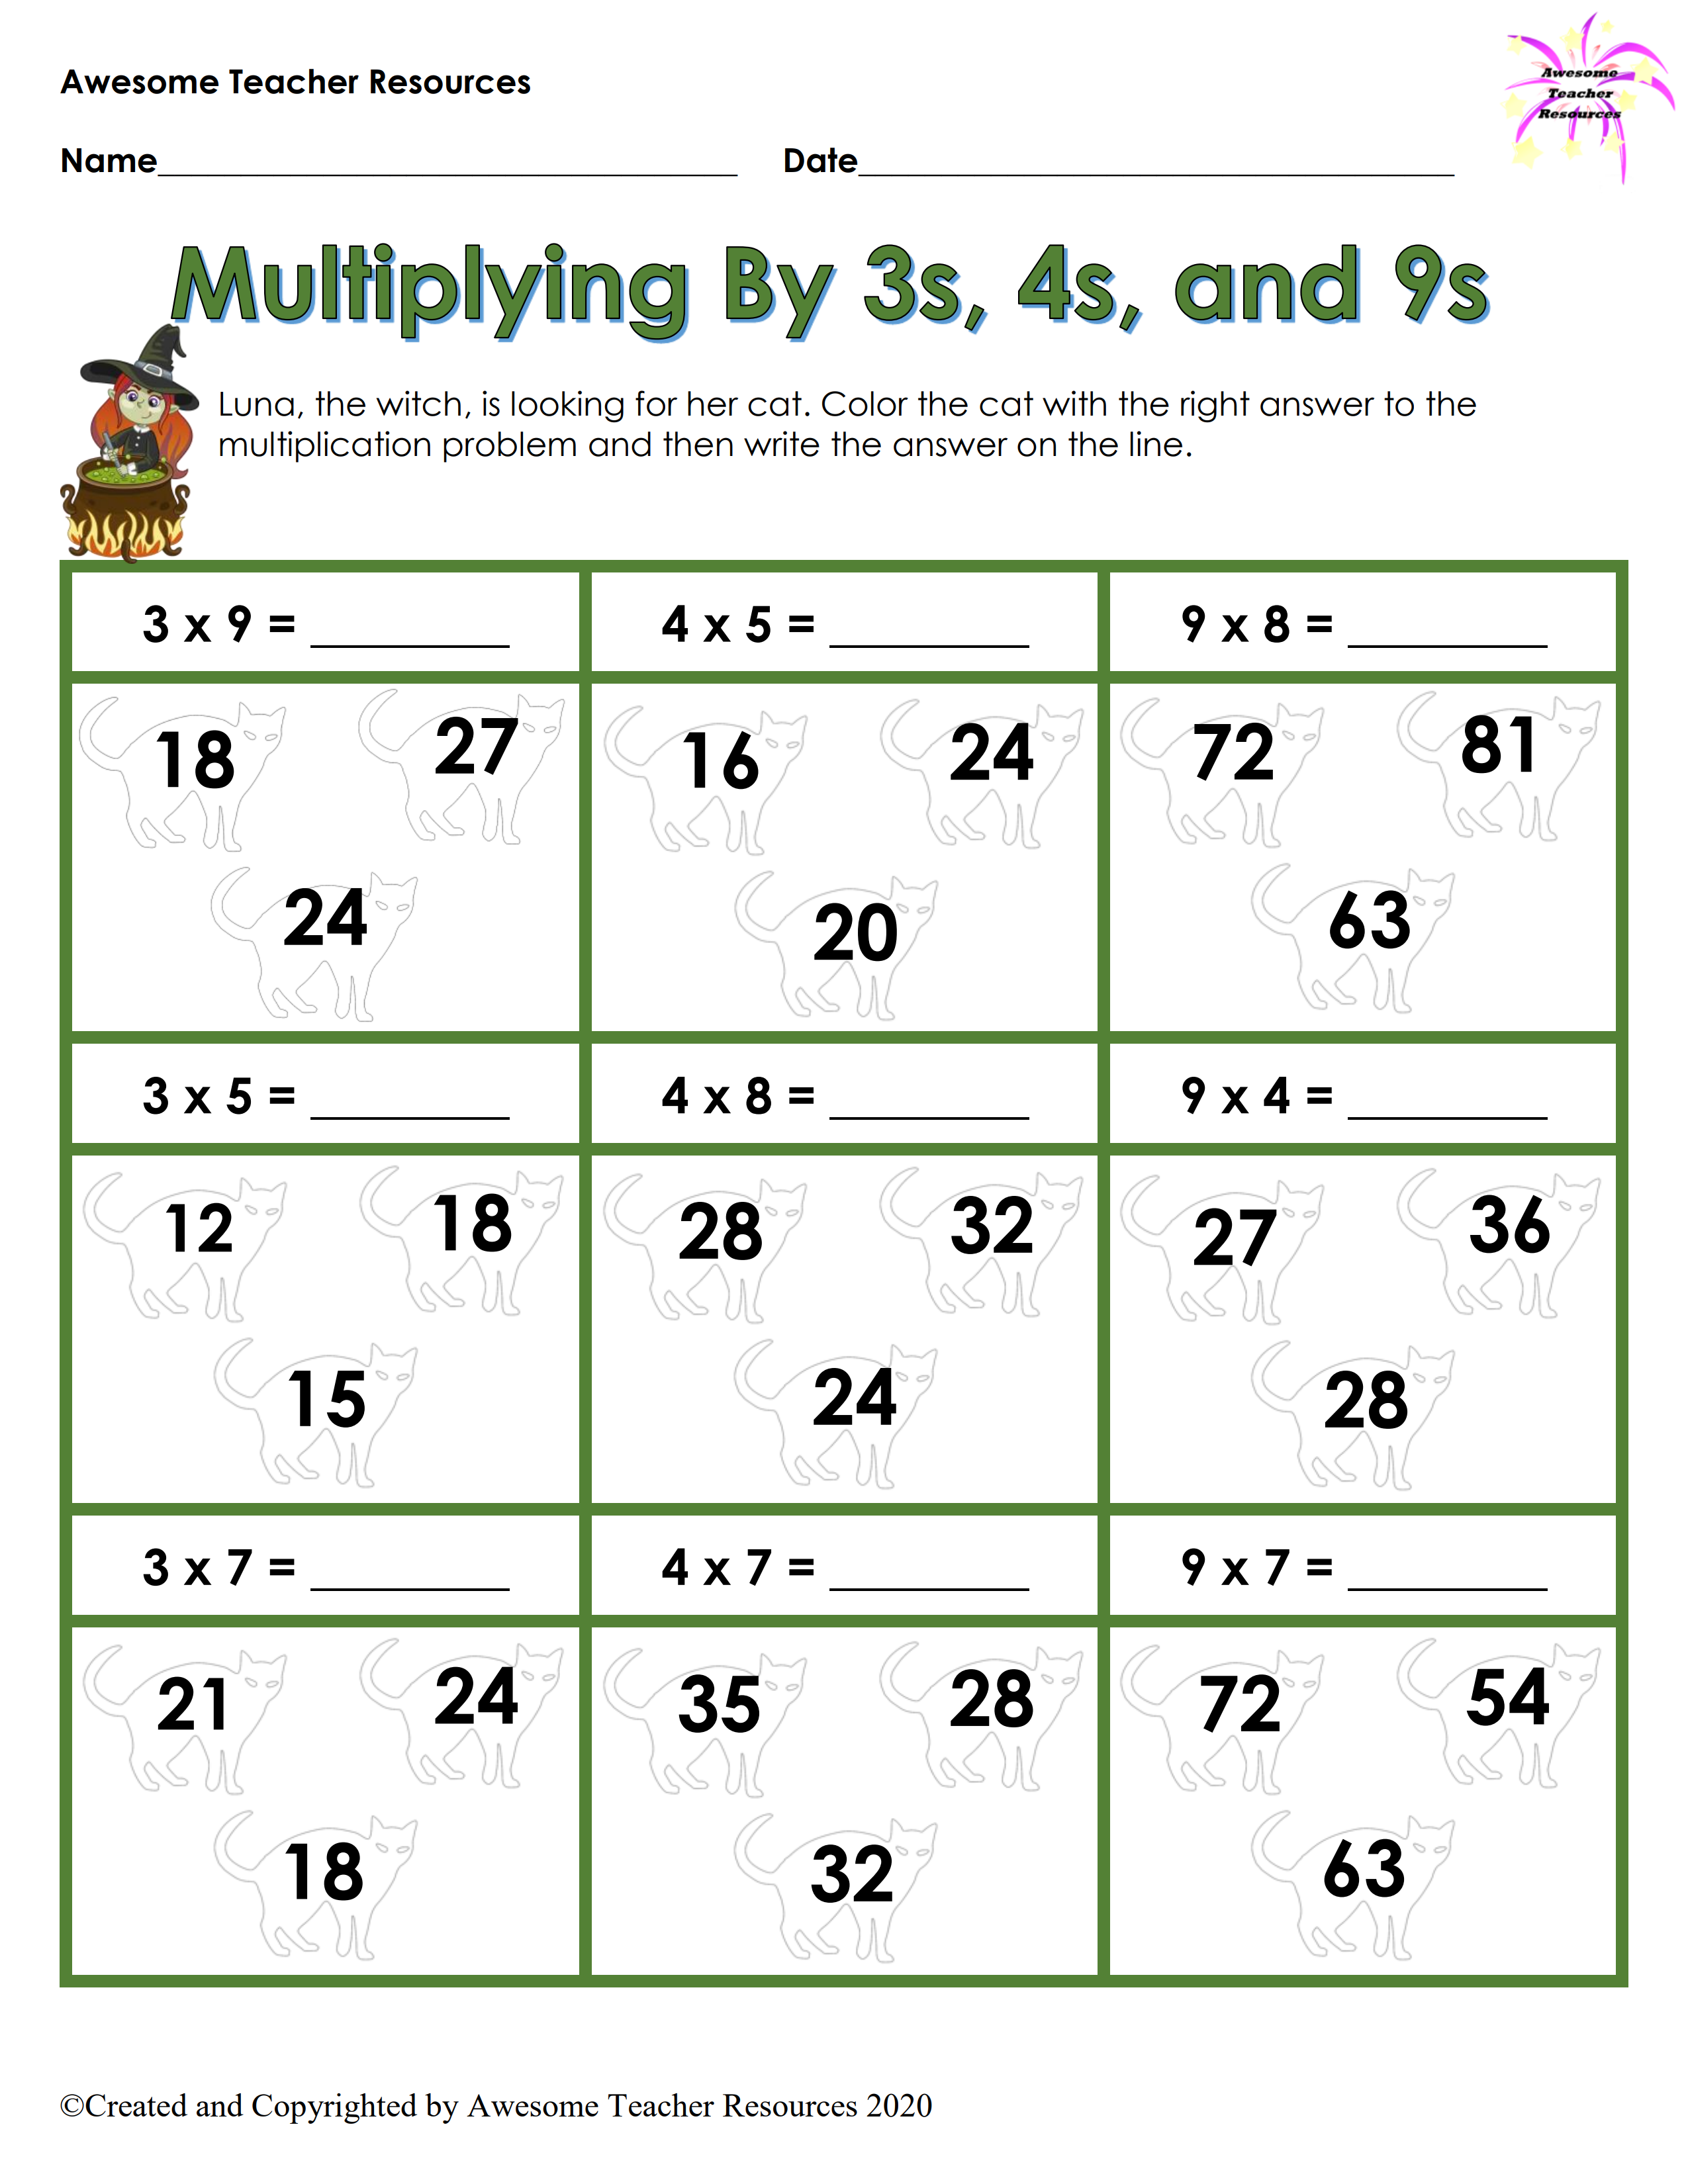 printable-multiplication-worksheets-3s-and-4s-multiplication-worksheets